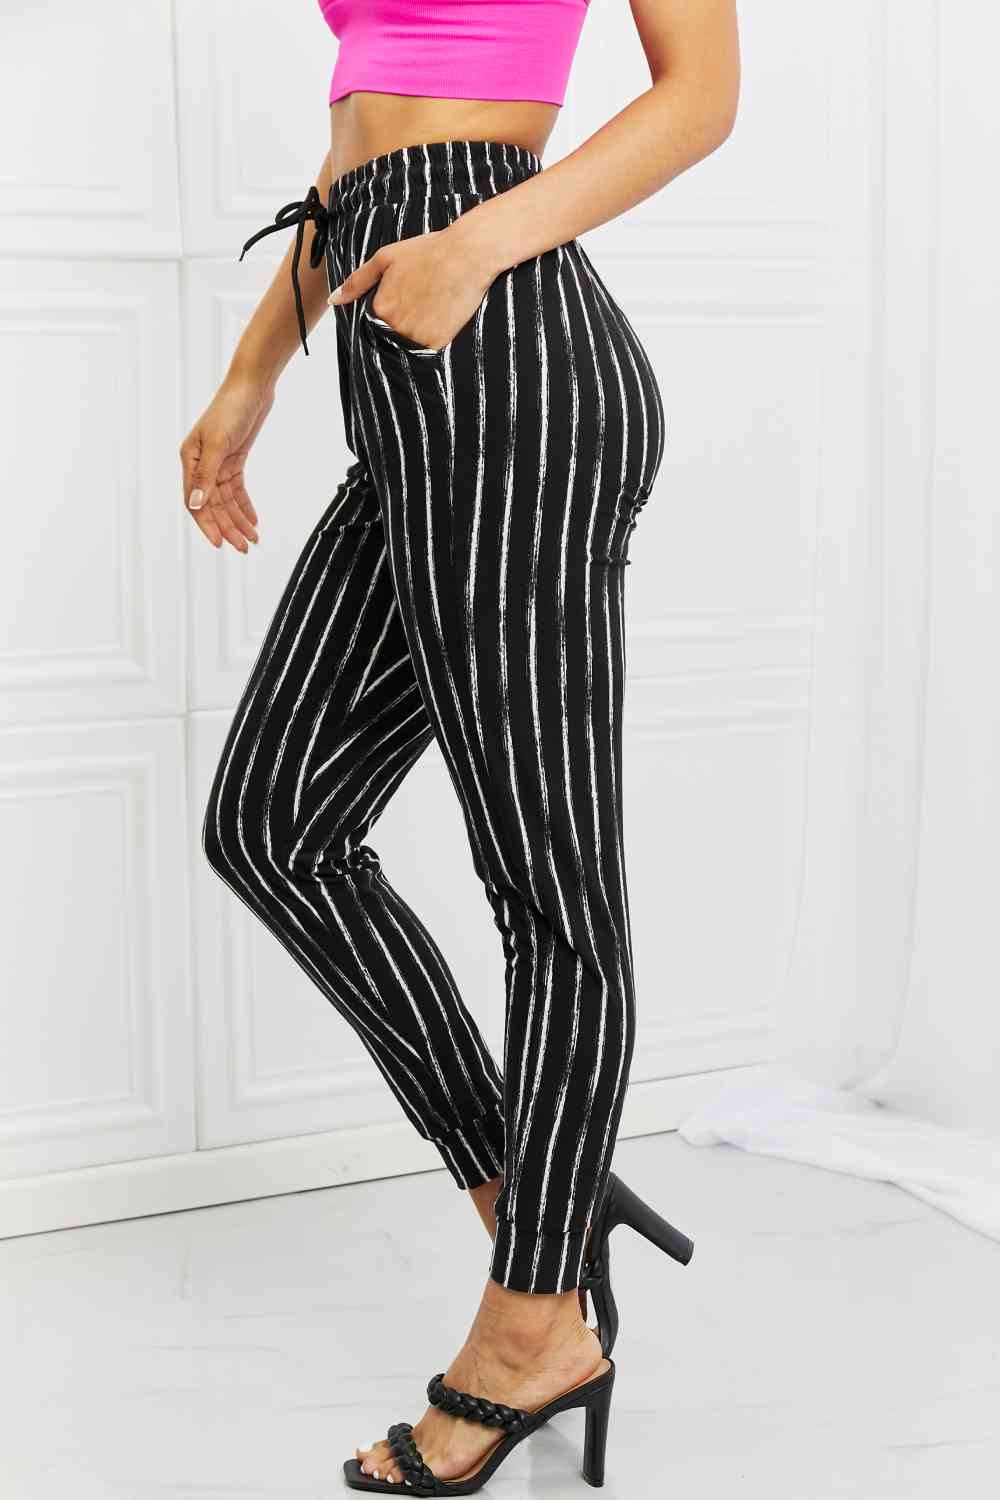 Classic Striped Drawstring Joggers With Pockets